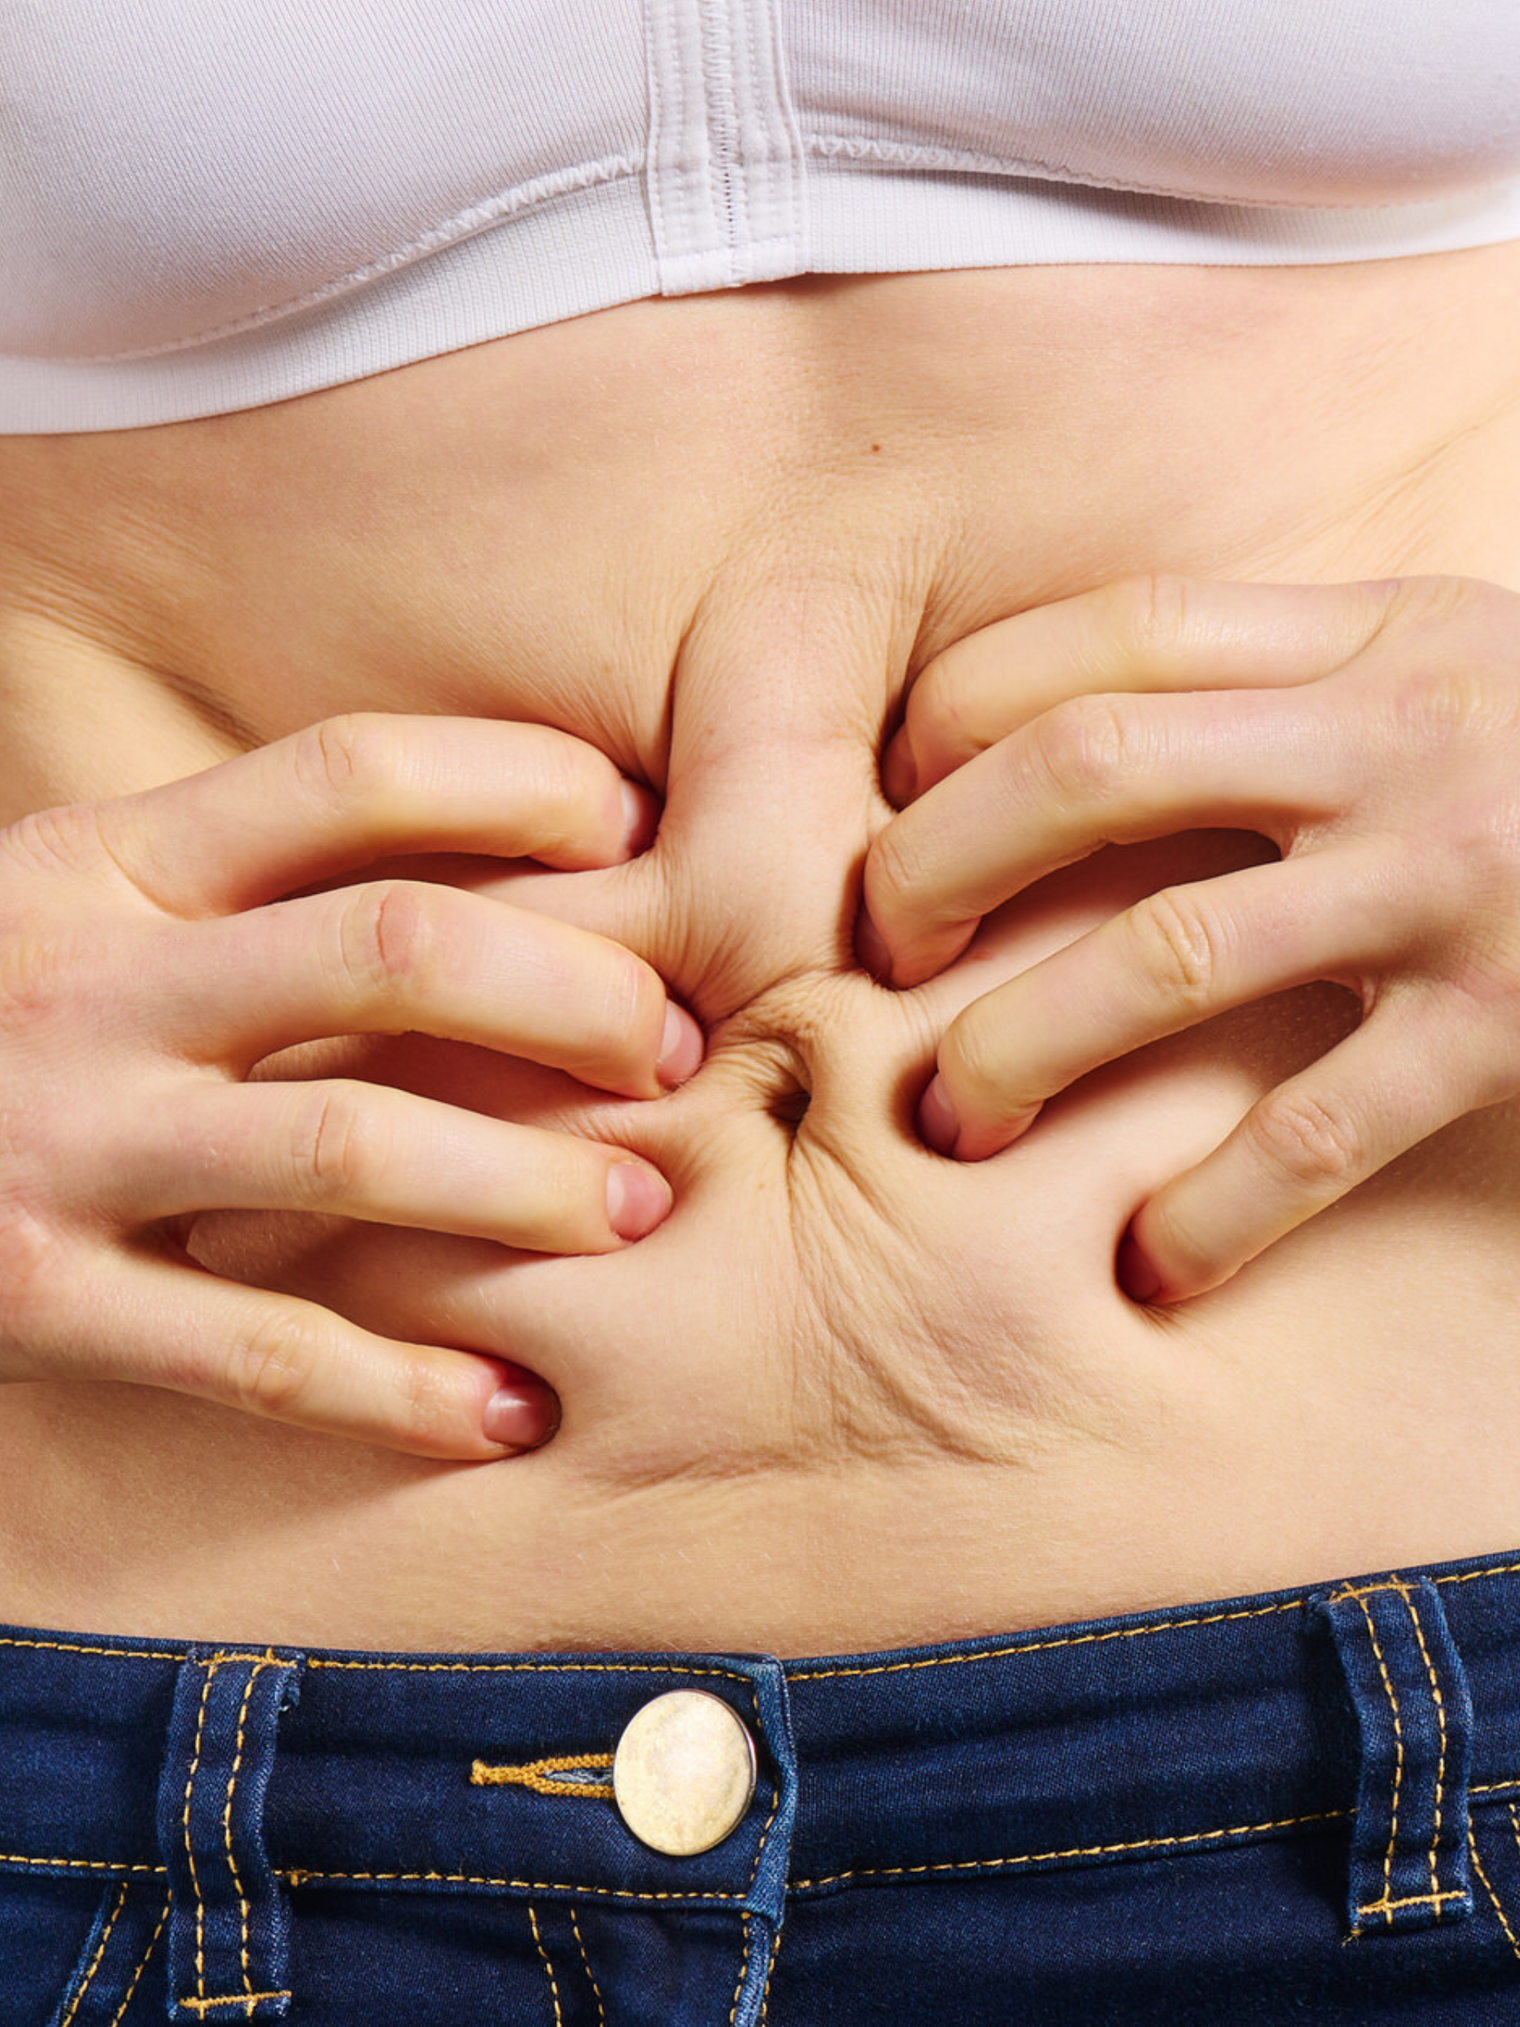 Get rid of a bloated stomach